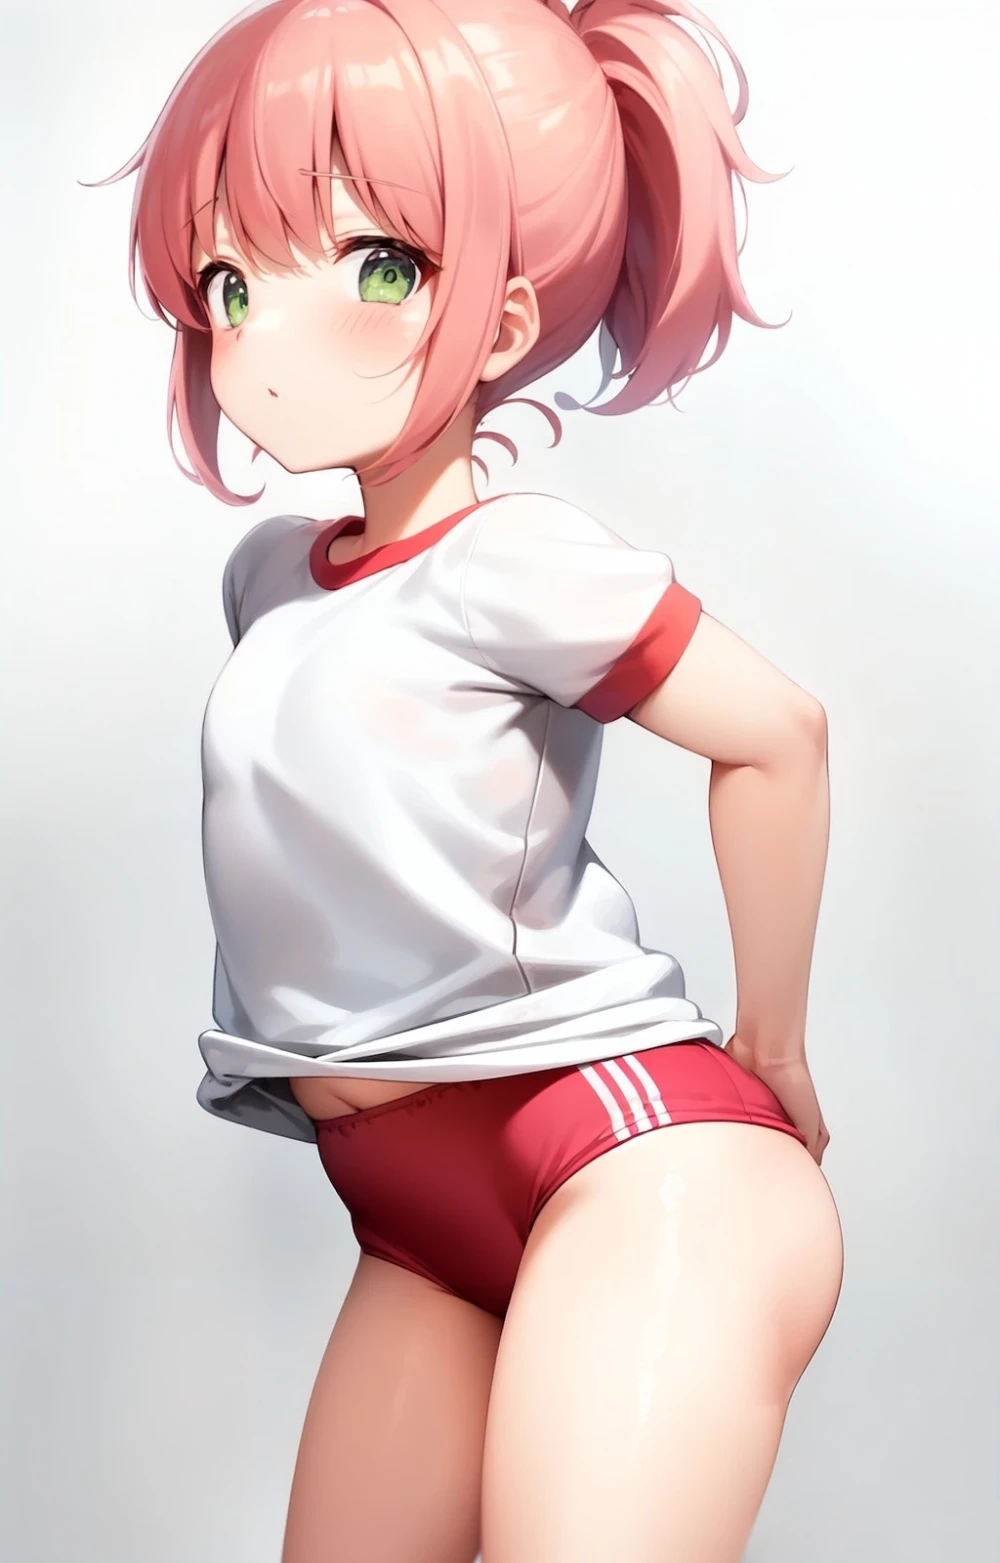 bloomers-anime-style-all-ages-2-22